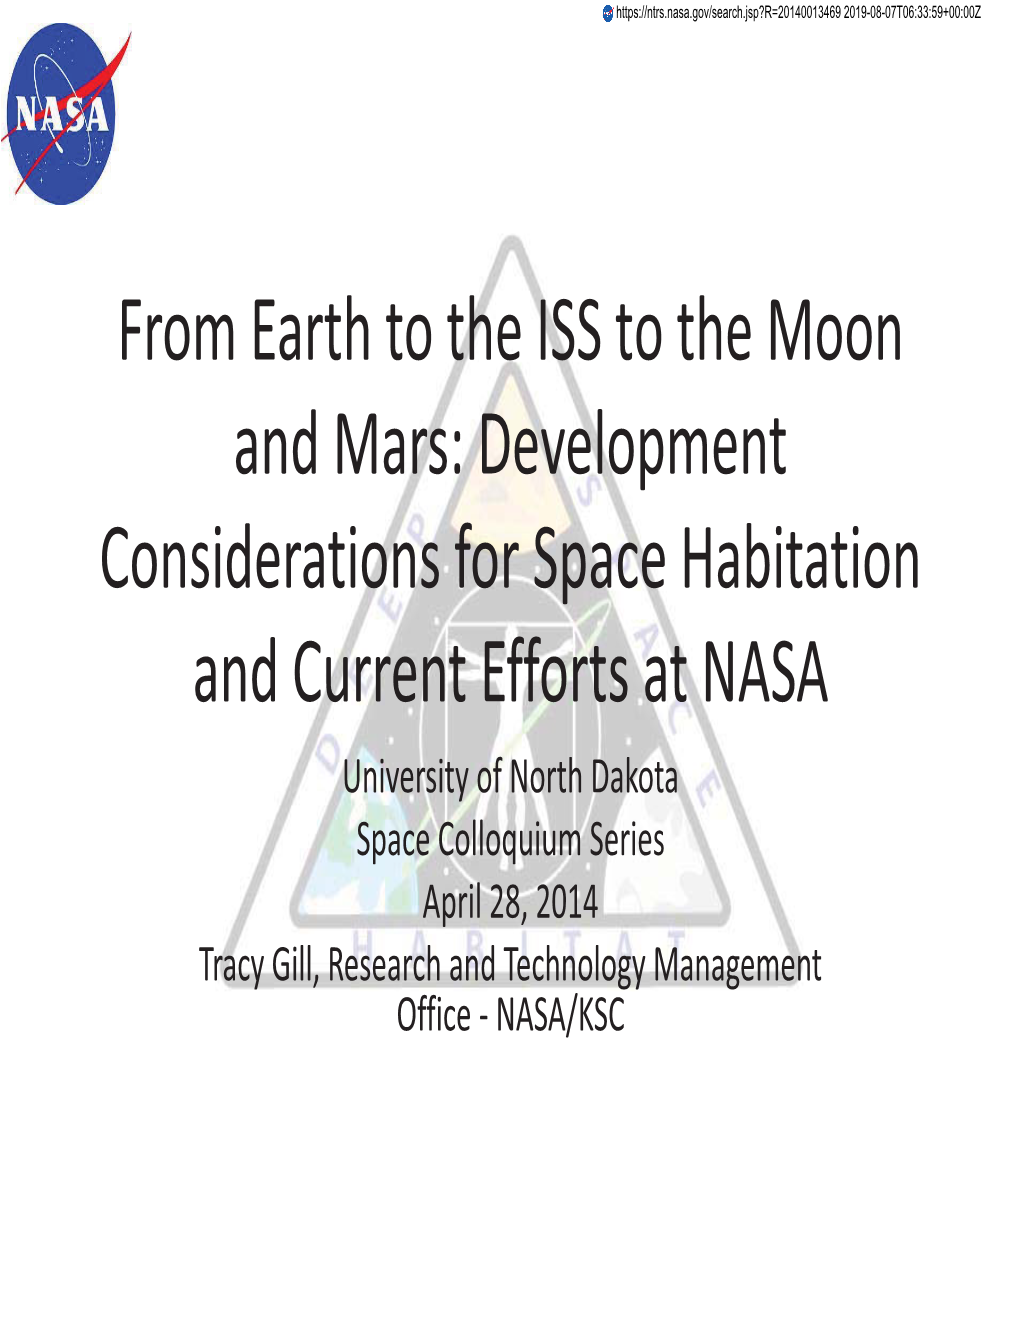 From Earth to the ISS to the Moon and Mars: Development Considerations